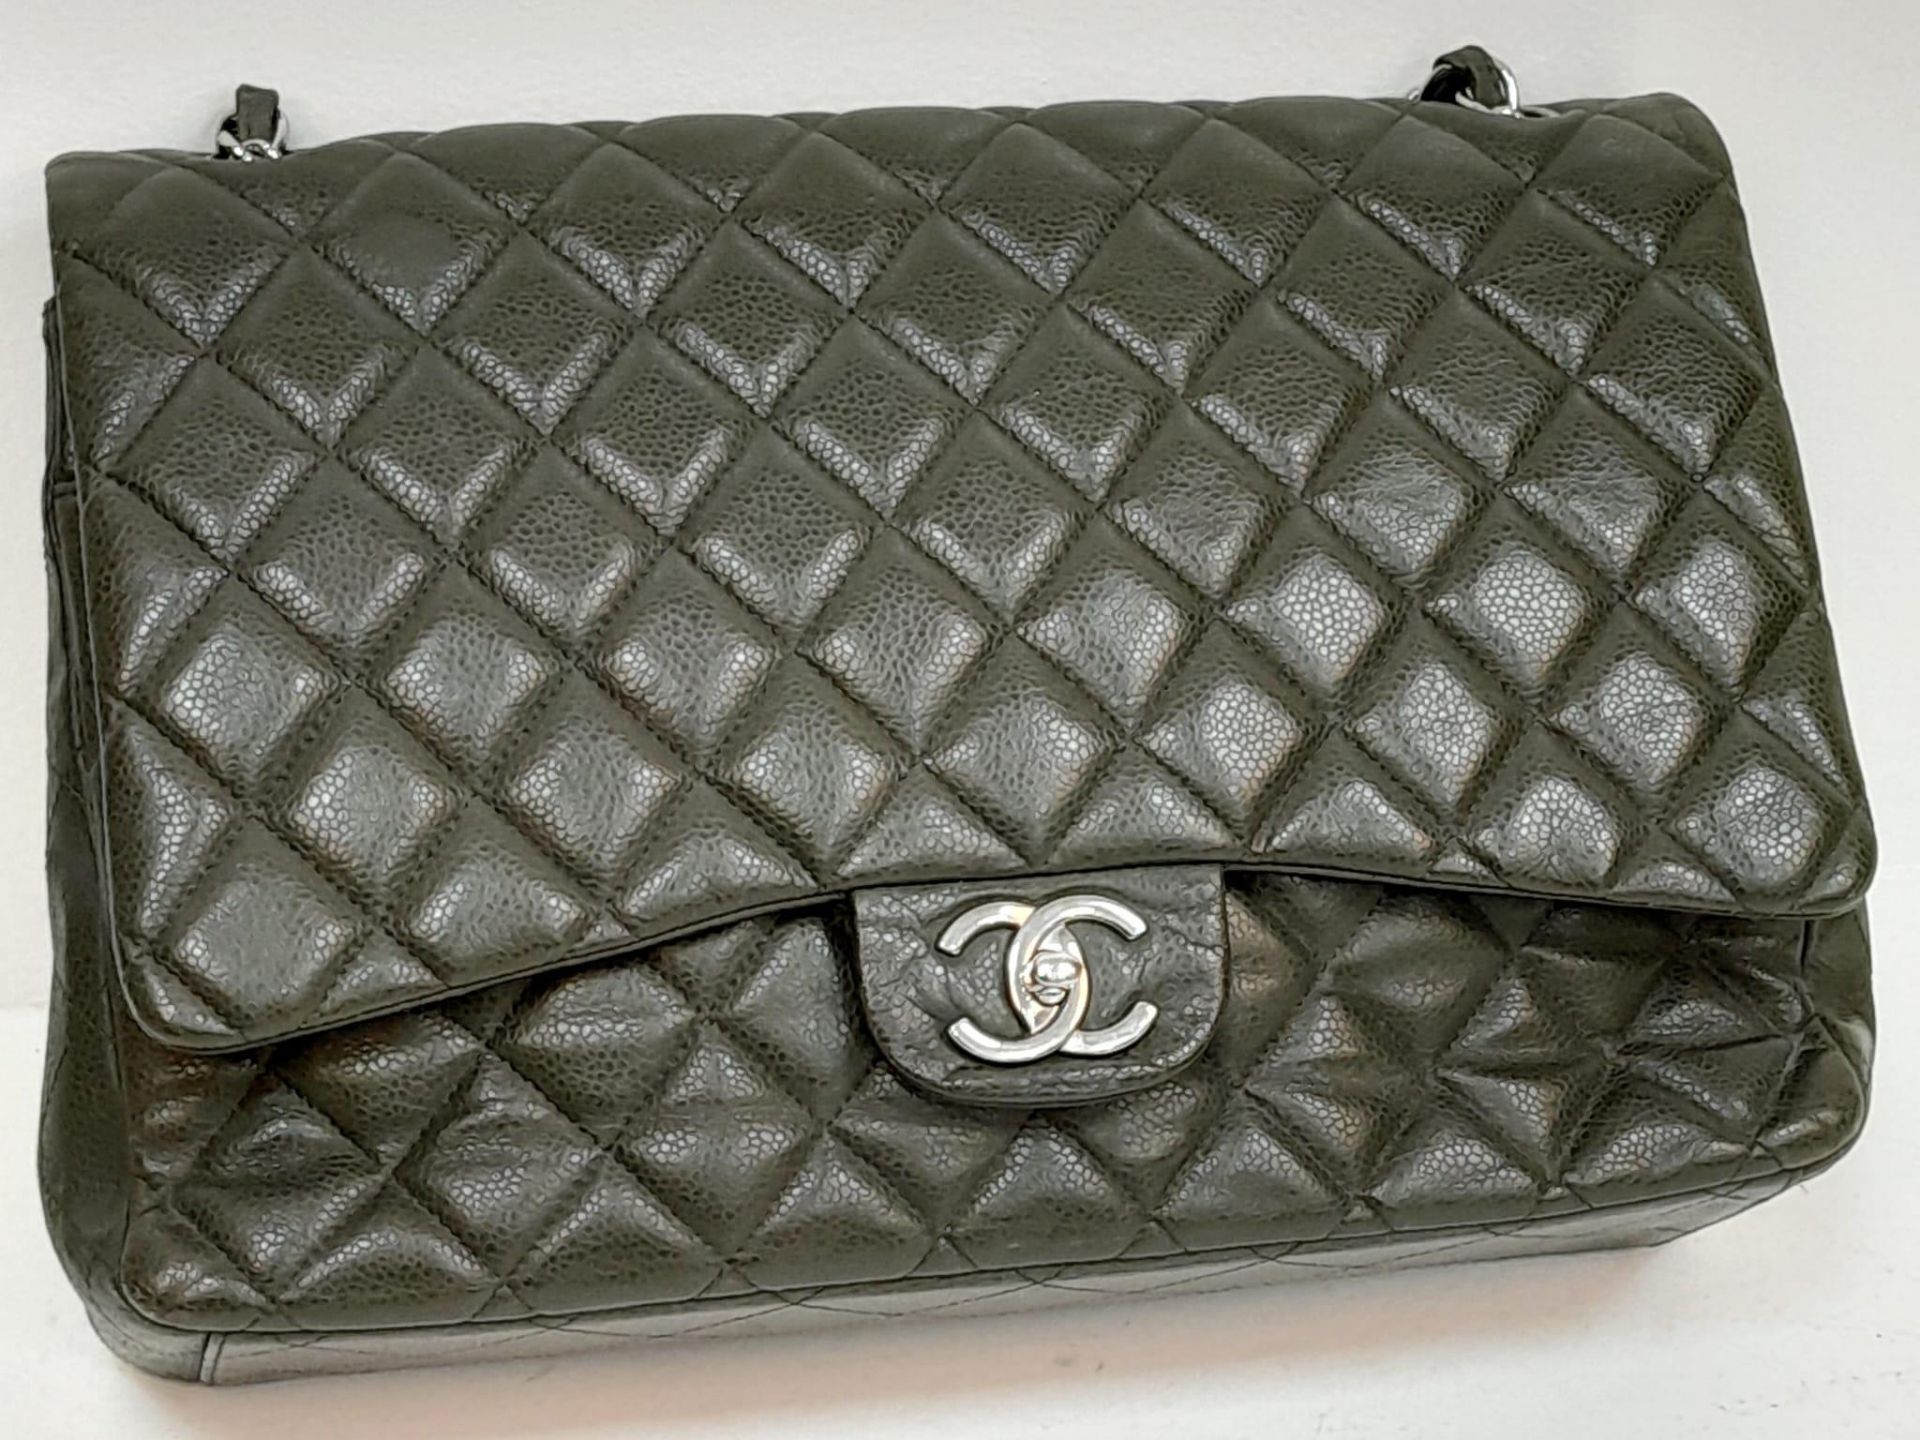 A Chanel Green Jumbo Classic Double Flap Bag. Quilted leather exterior with silver-toned hardware, - Image 3 of 14